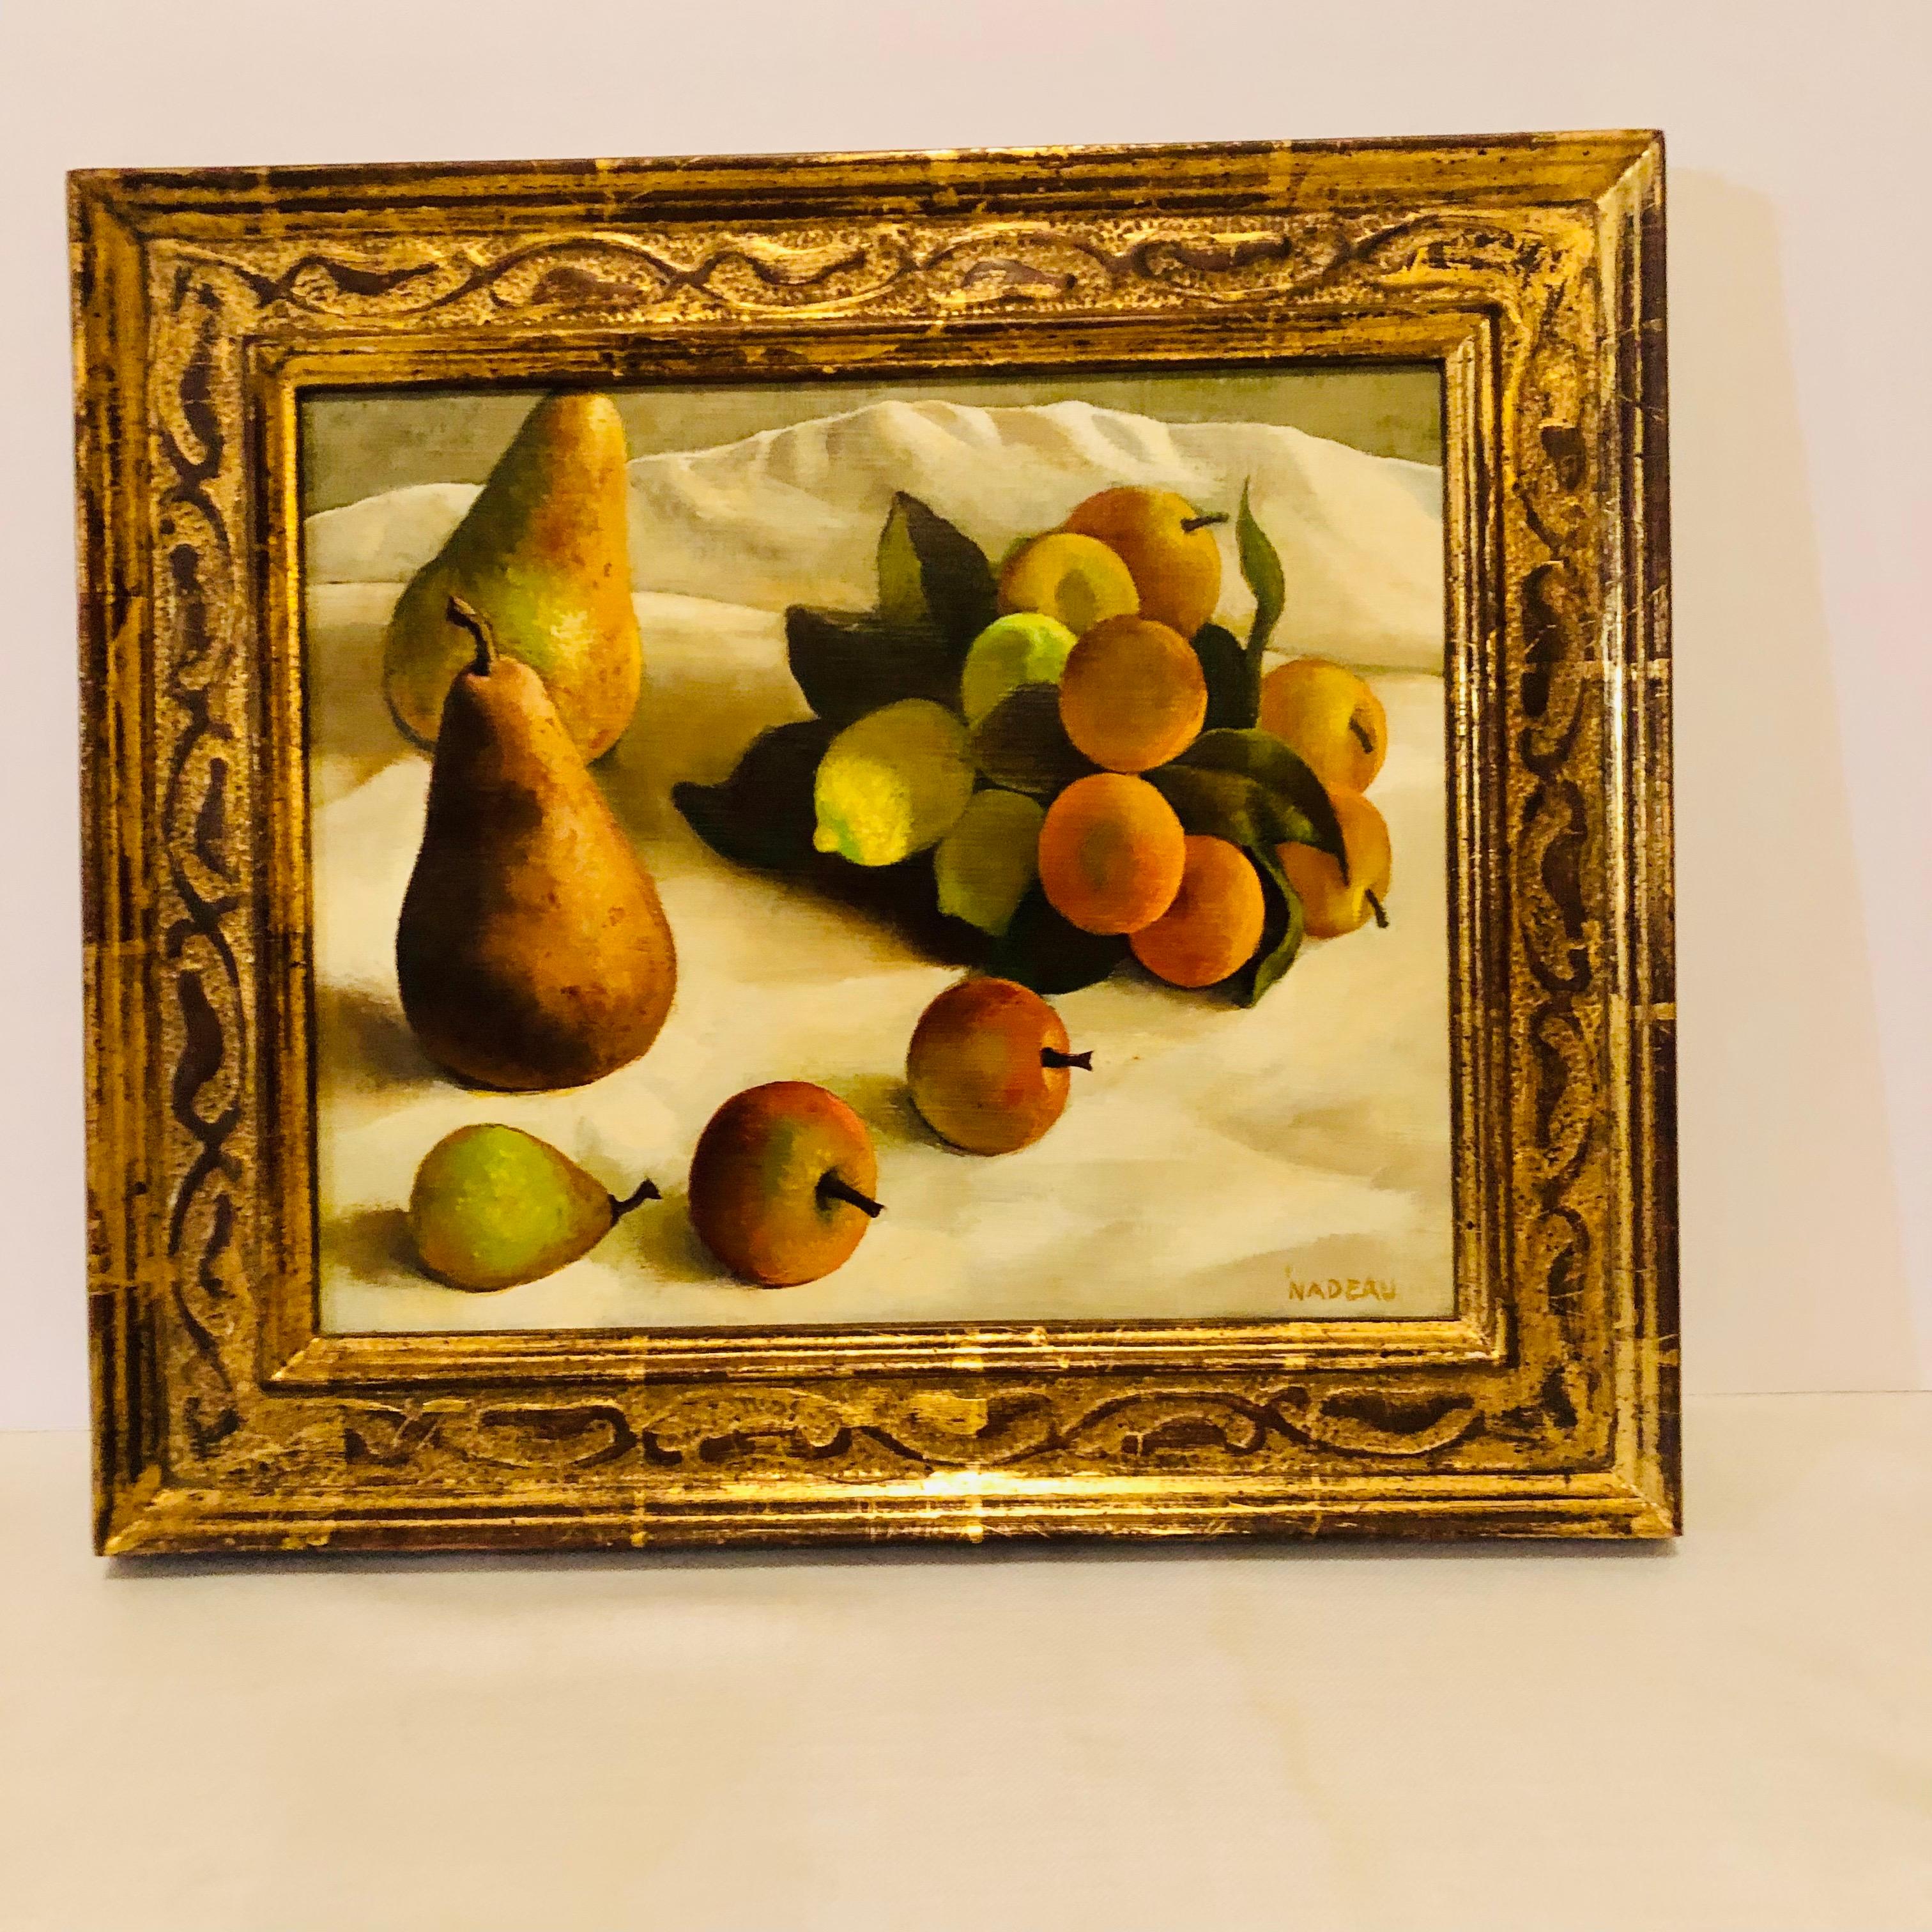 Hand-Painted Oil on Canvas Painting of Pears and Other Fruits in a Gold Frame Signed Nadeau